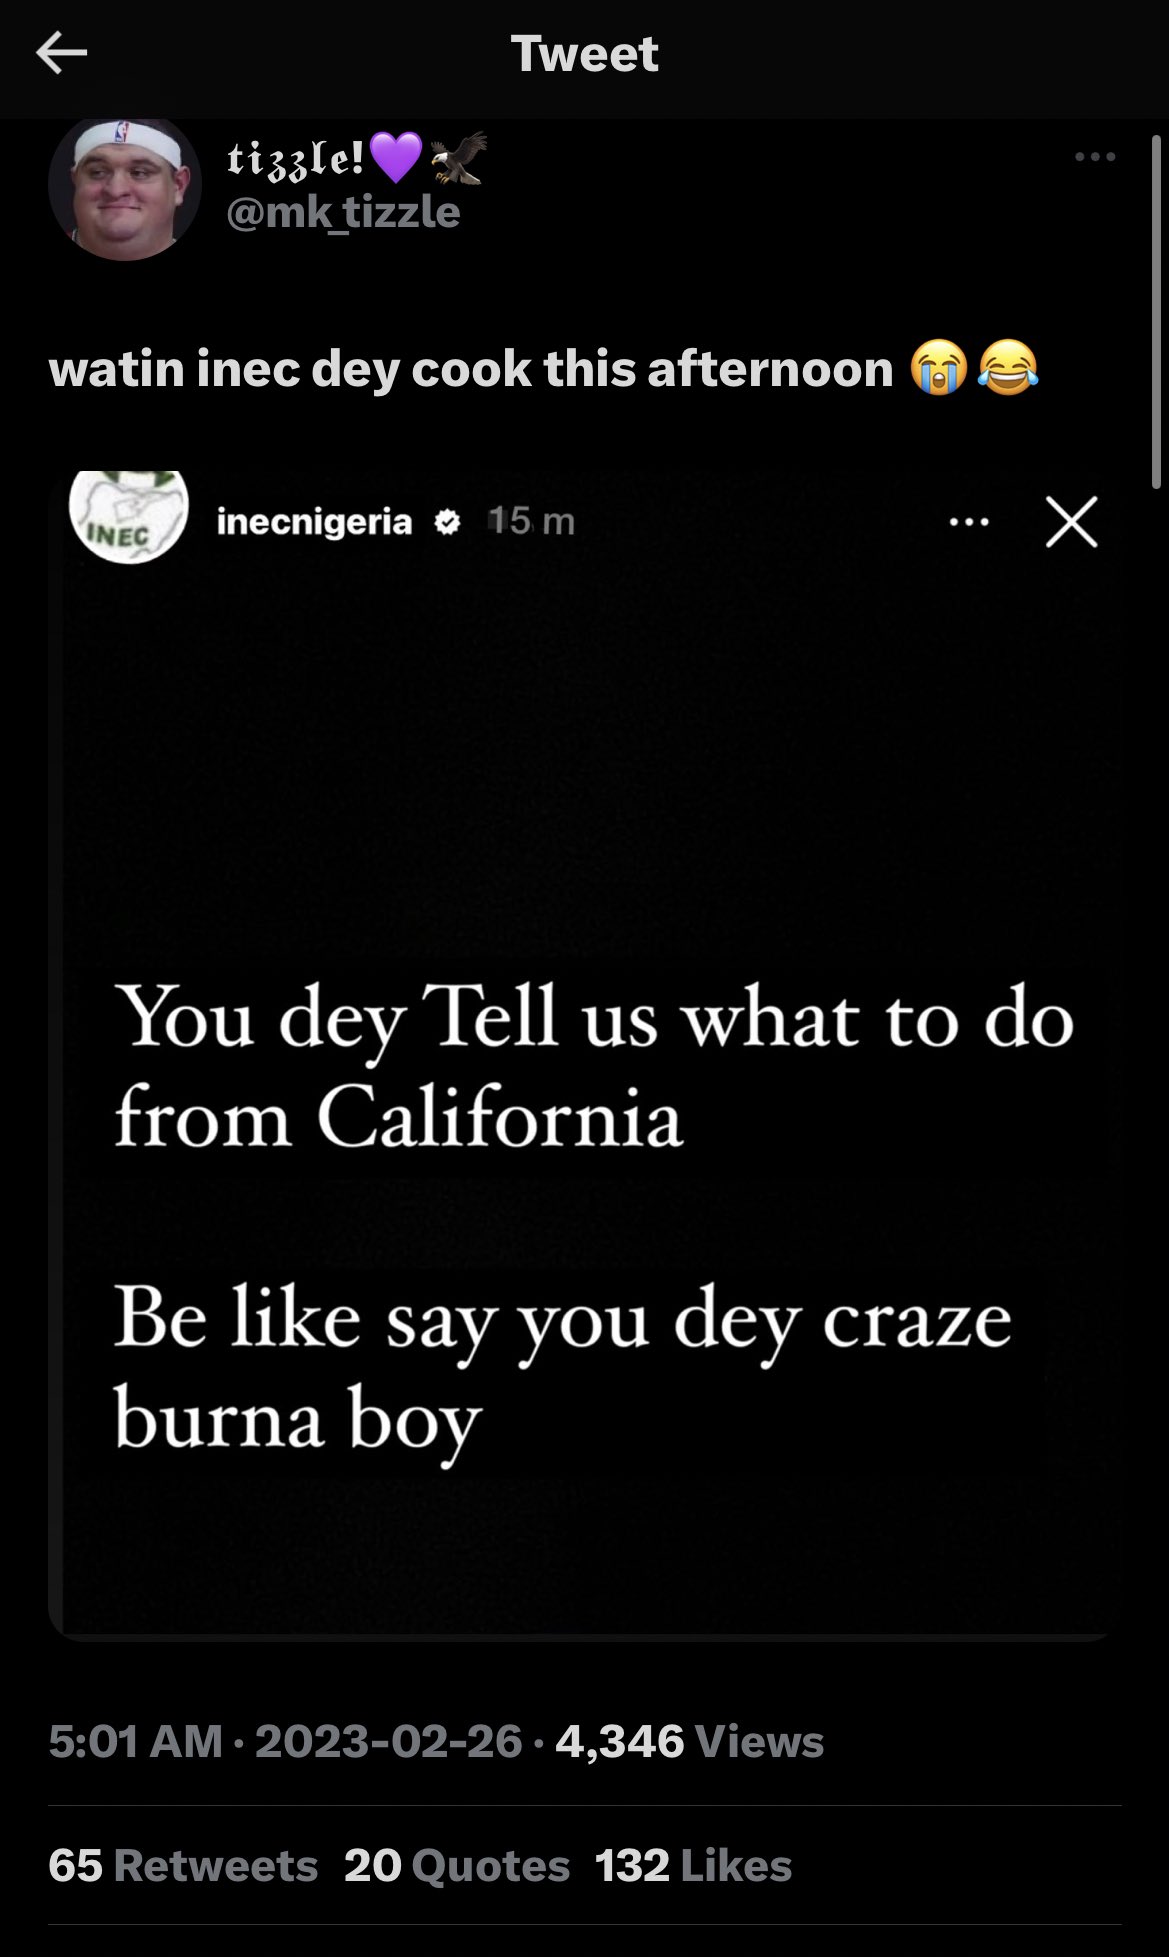 Nigerians think poorly of Burna Boy when he challenges INEC from California with the phrase